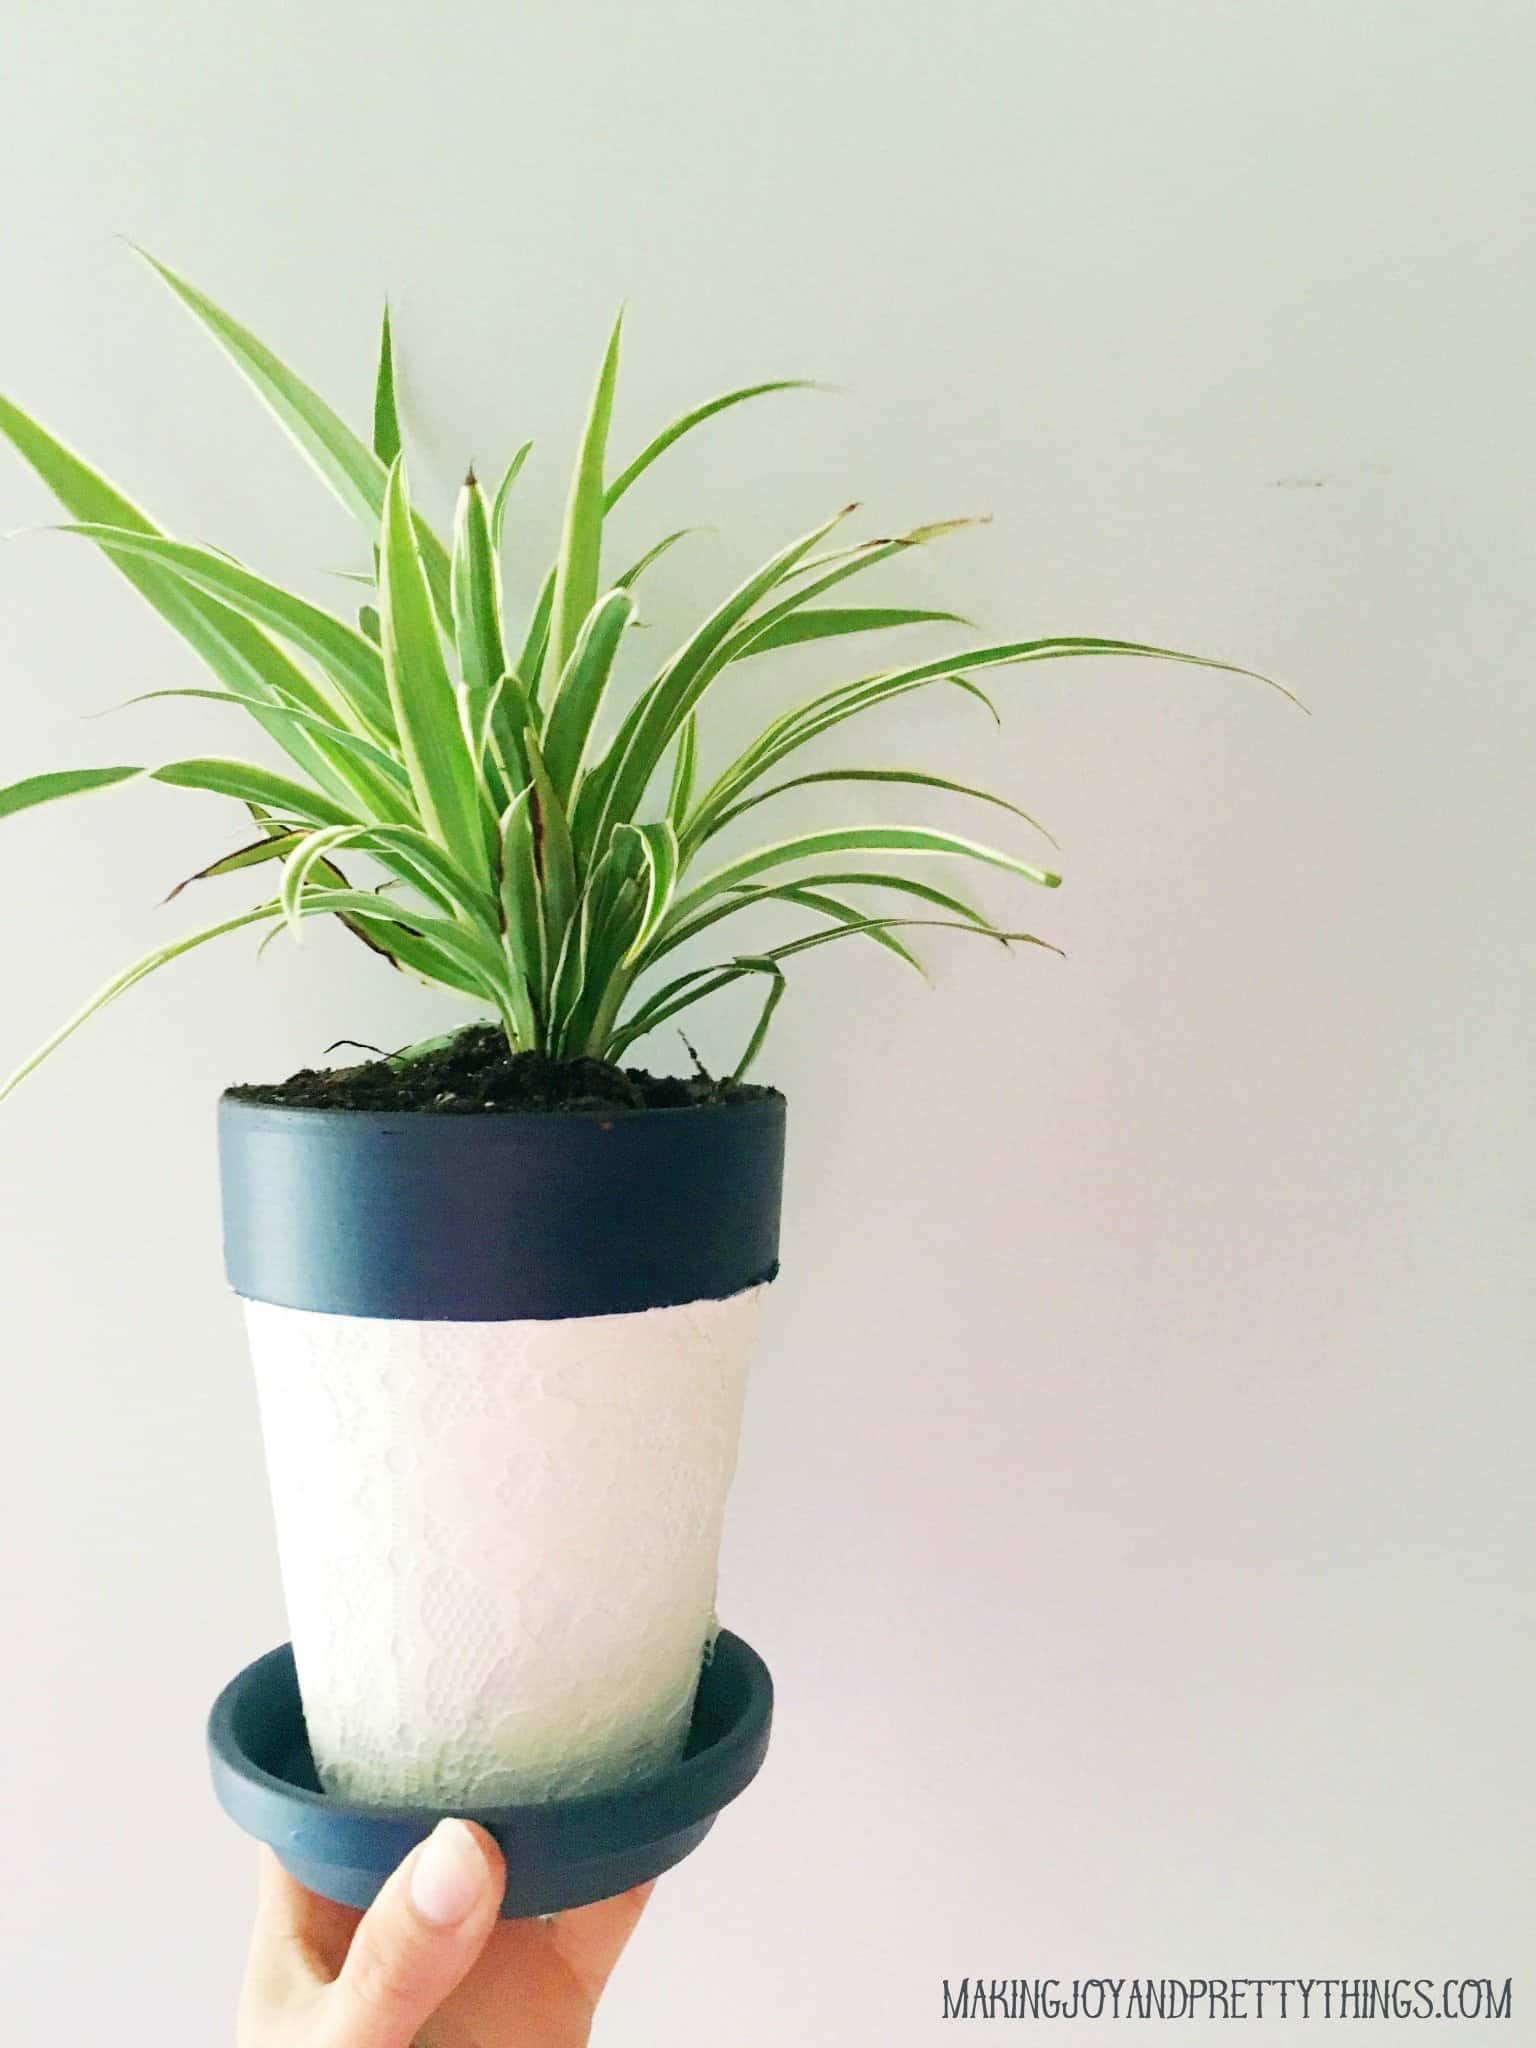 A freshly potted dracaena plant in a white and blue painted terra cotta pot. The pot is painted white and covered in a lace fabric, and the pot rim and saucer are painted a deep blue.